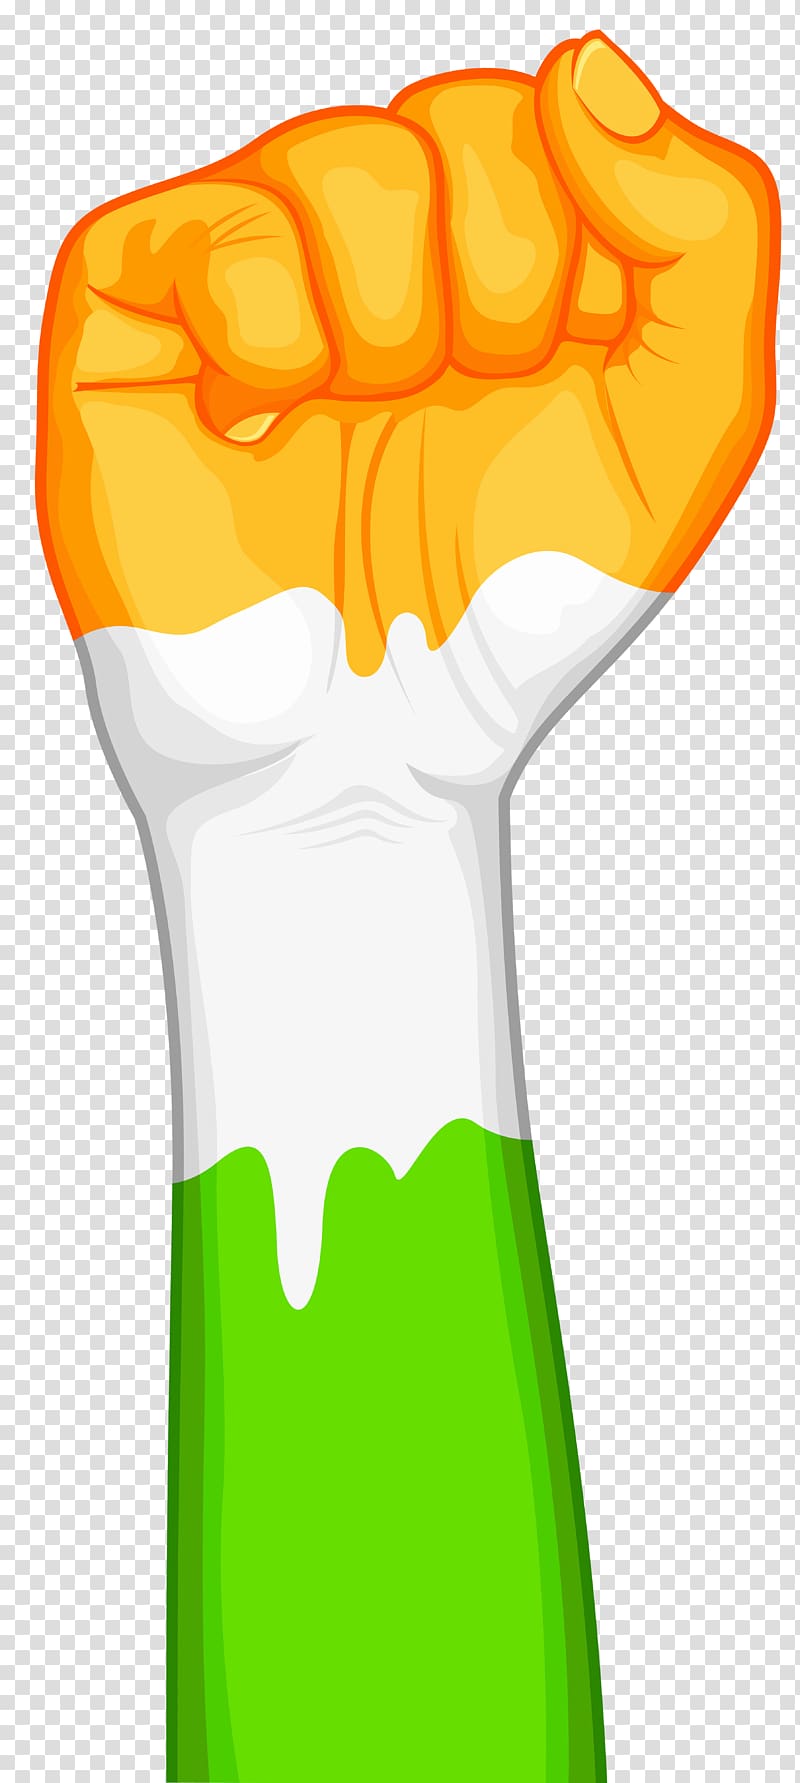 orange, white, and green right fist poster, Indian Independence Day Republic Day January 26 , India Fist transparent background PNG clipart